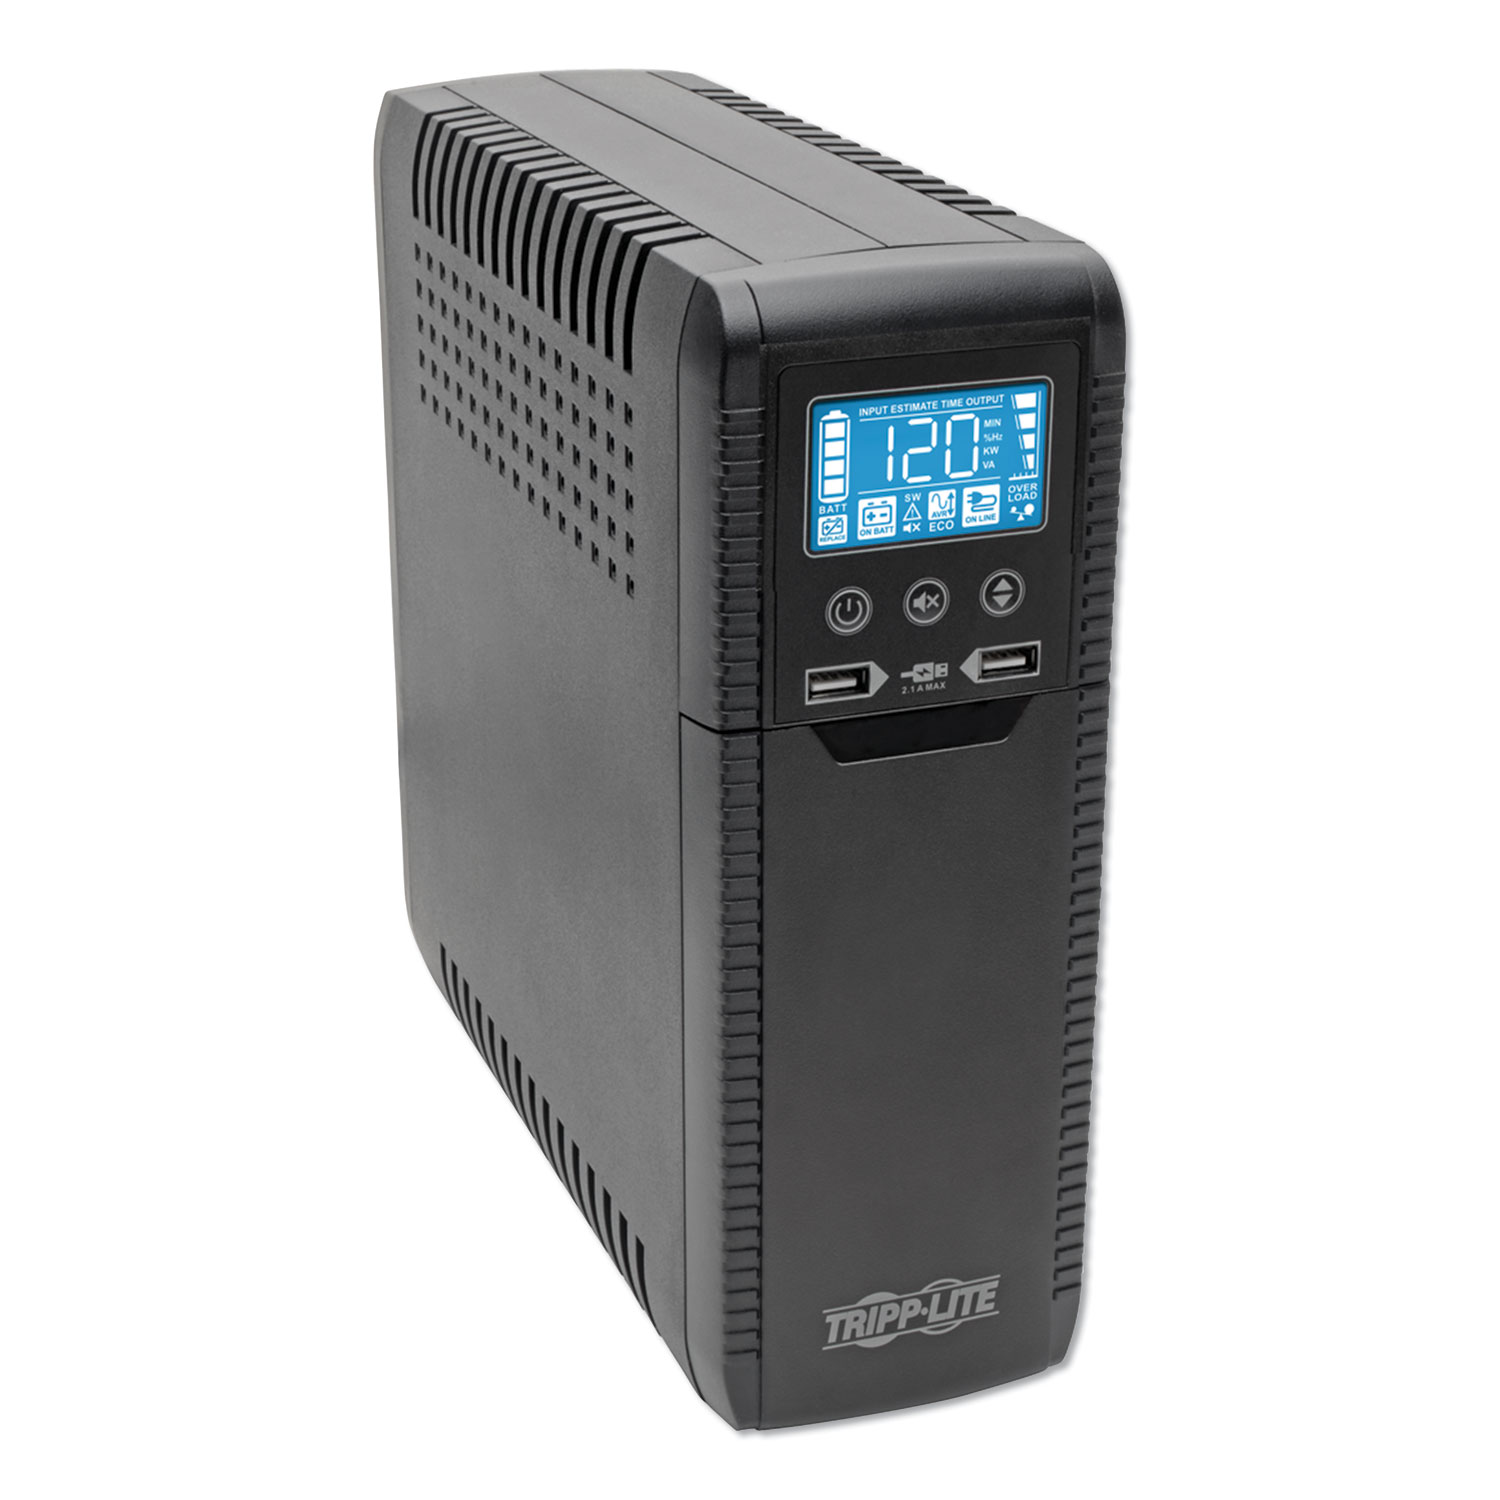 ECO Series Desktop UPS Systems with USB Monitoring, 8 Outlets 1000 VA, 316 J